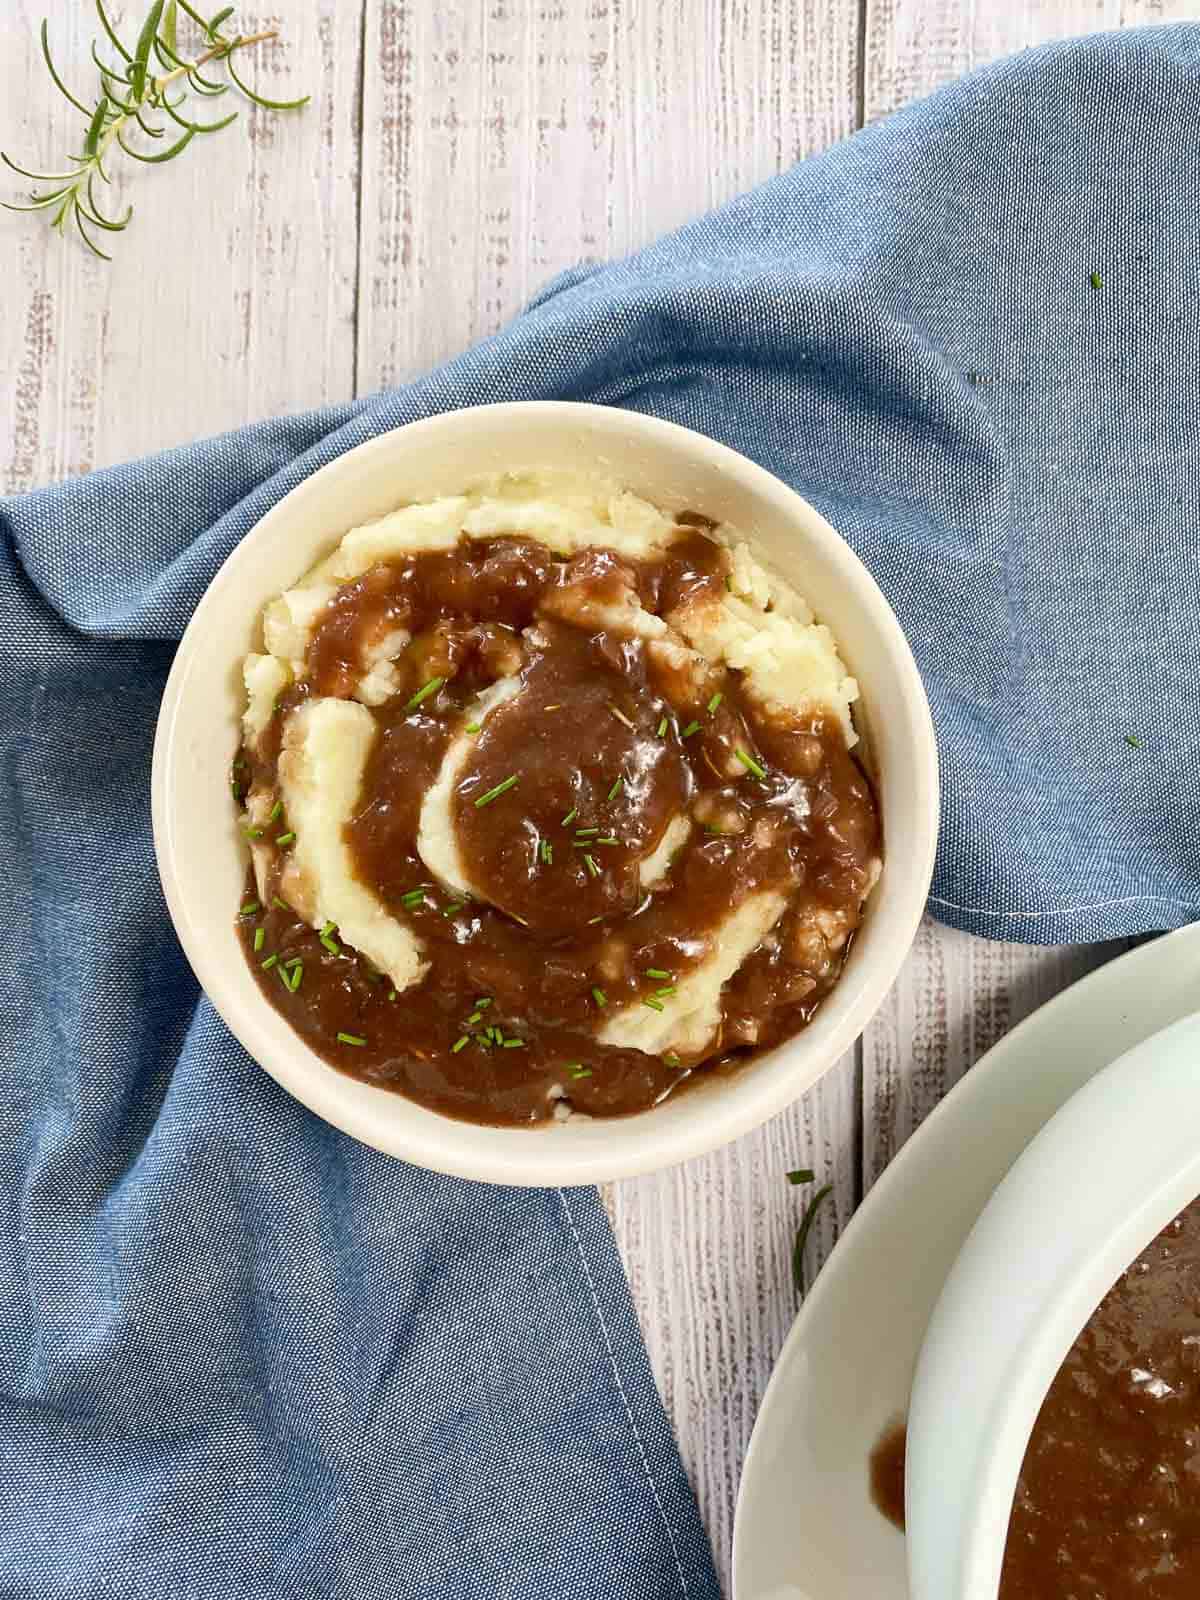 Bowl of mashed potatoes with gravy and chives on top with blue towel underneath.